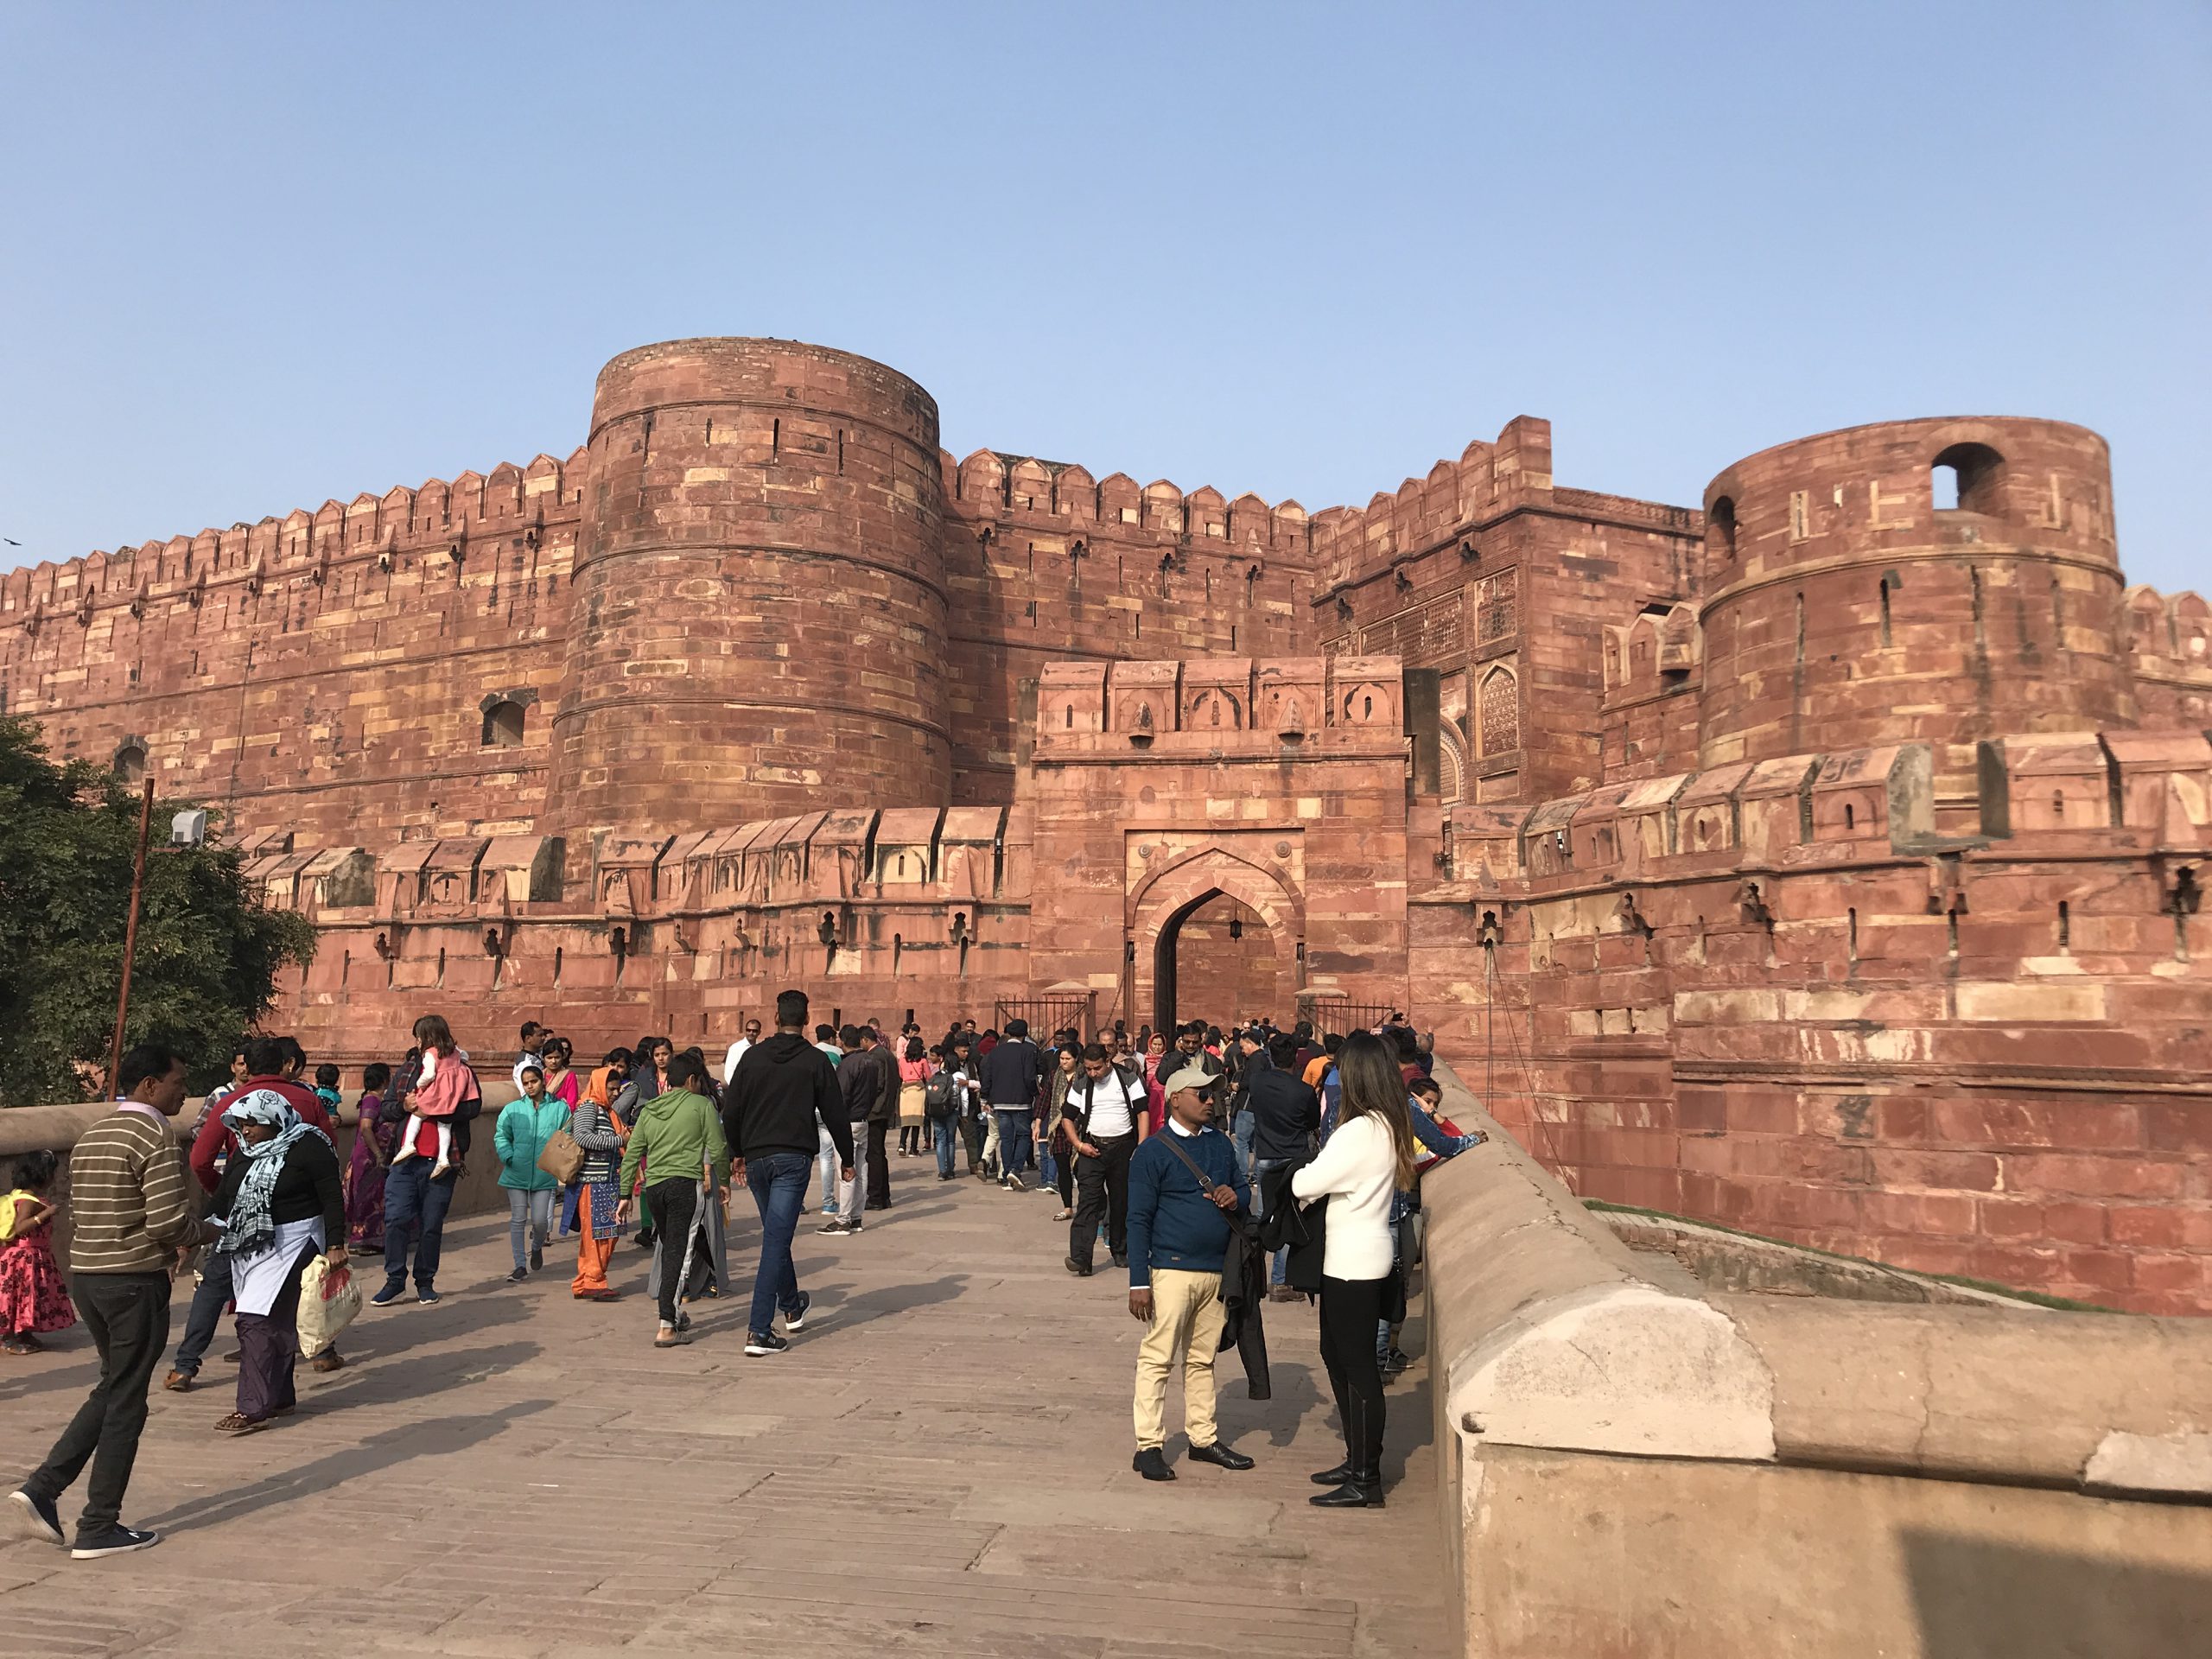 Agra Fort Red Fort in Agra India World Herritage Site Mughal building and architecture of red sandstone typical before the marble constructions like the Taj Mahal